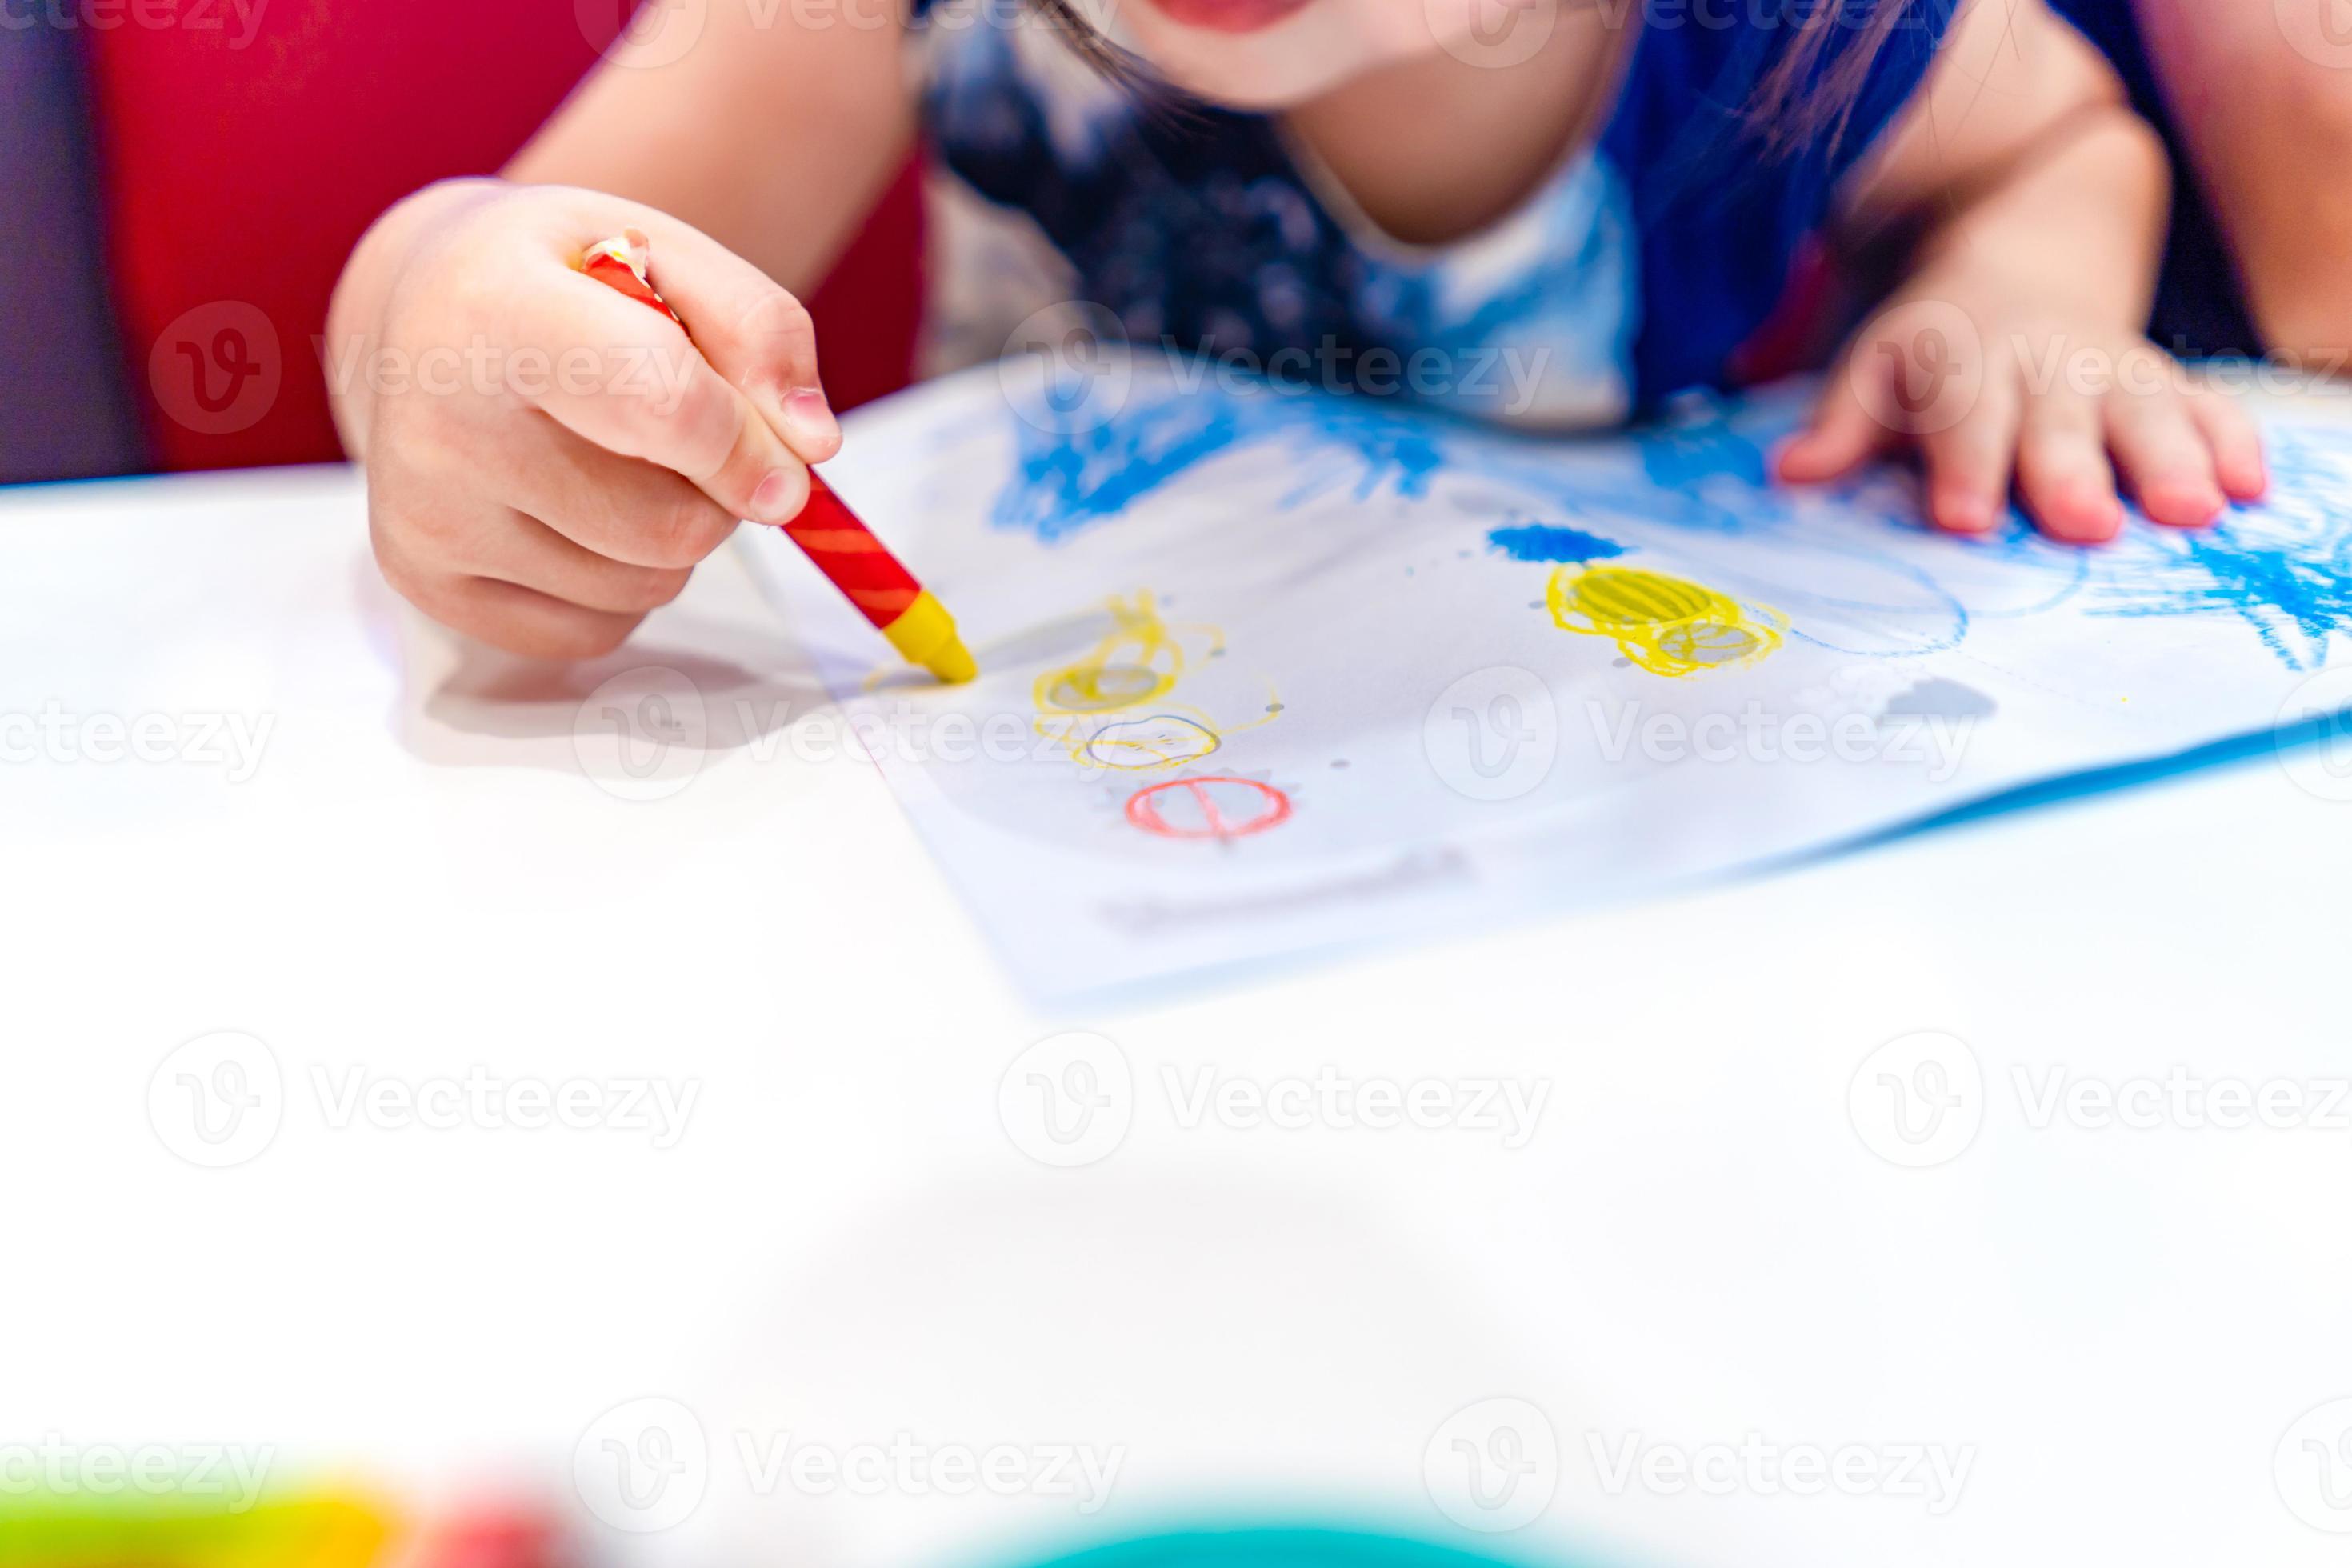 https://static.vecteezy.com/system/resources/previews/008/998/750/large_2x/kid-play-study-and-learn-how-to-color-and-draw-the-crayon-color-in-to-the-paper-with-her-parents-photo.jpg